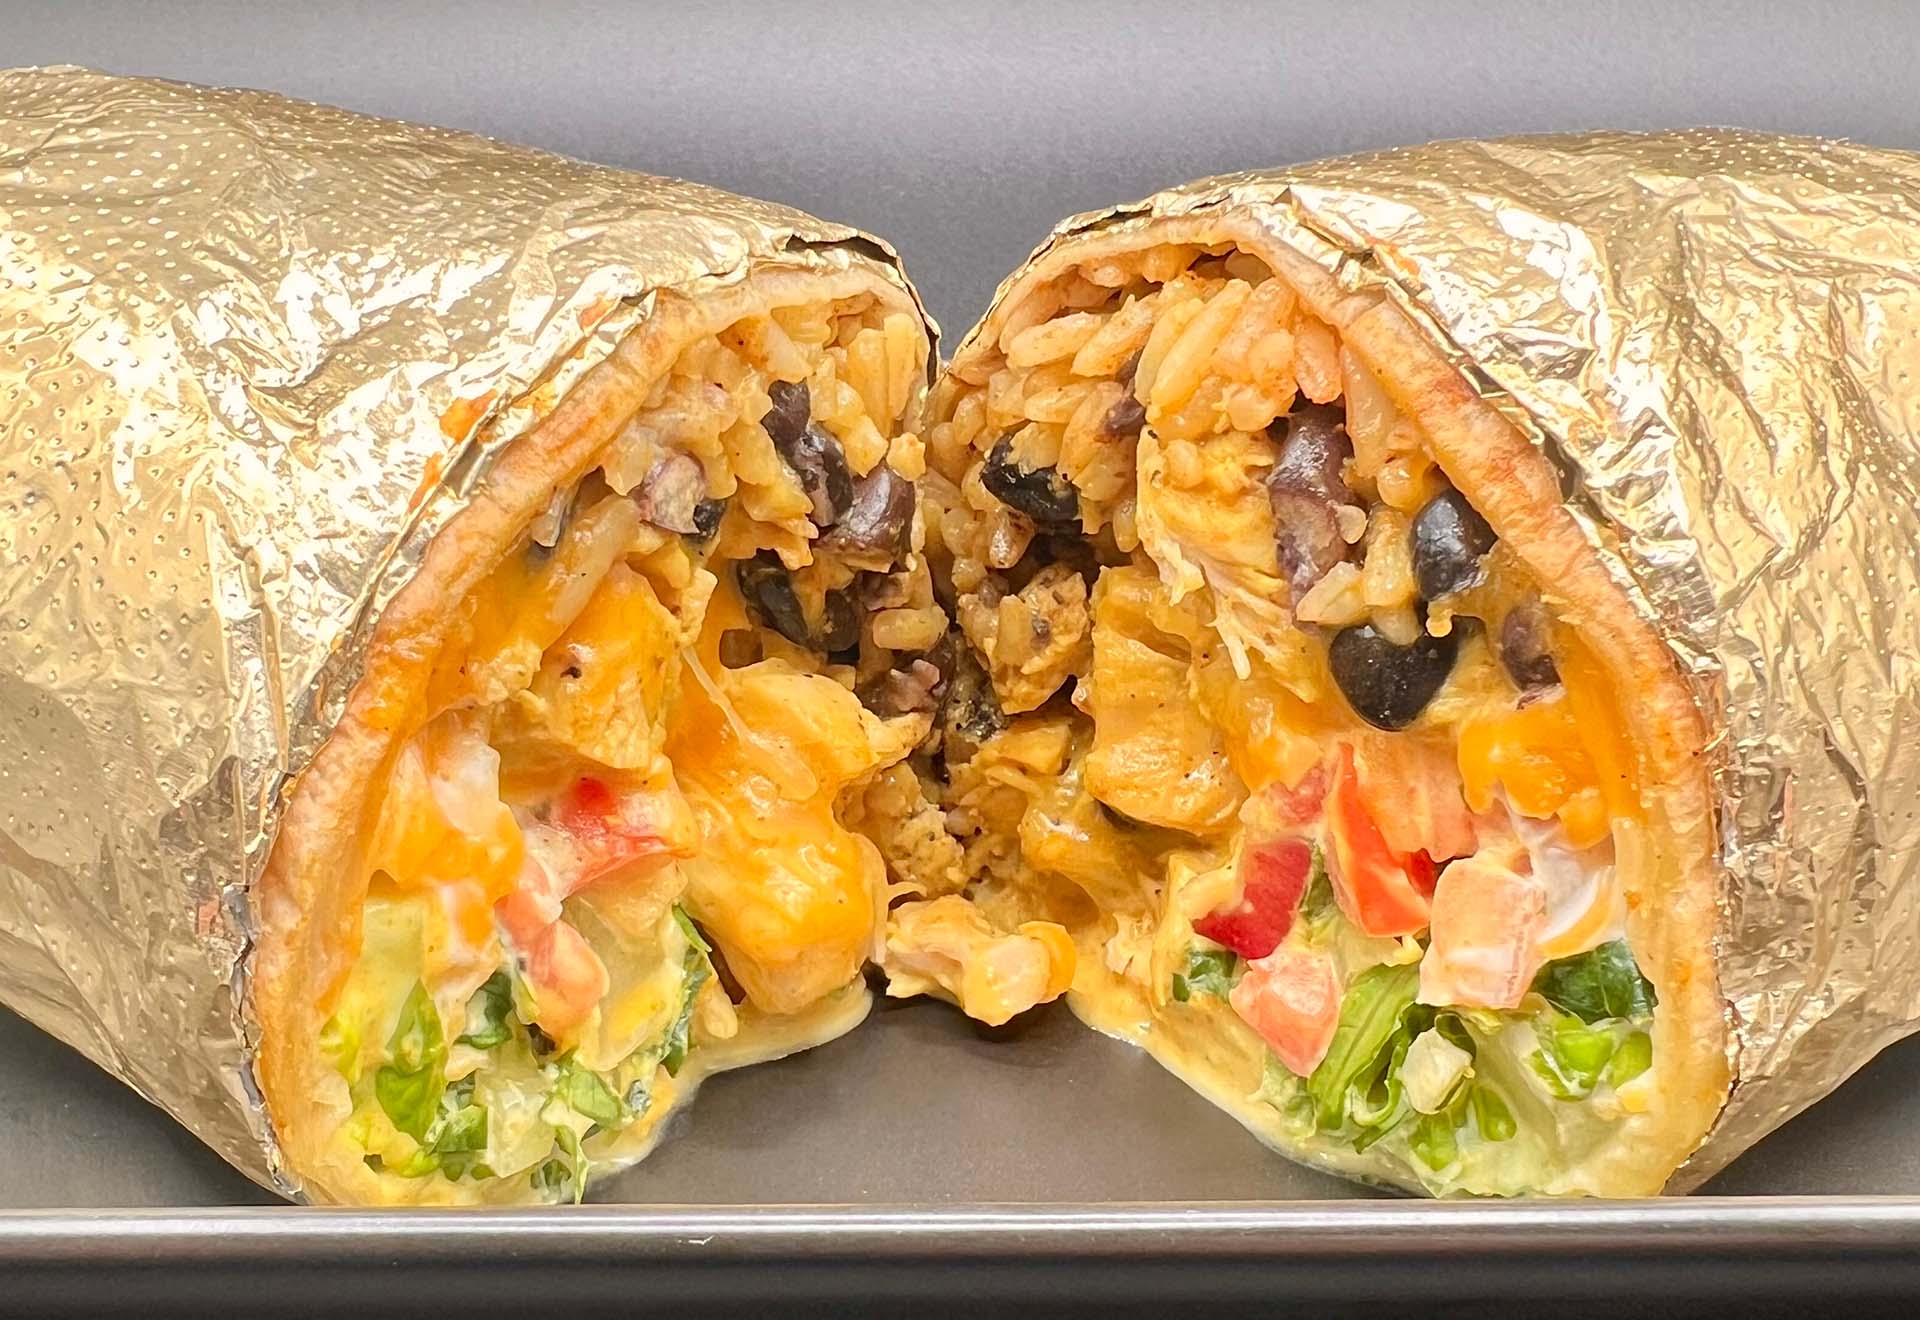 An oozy, overstuffed burrito wrapped in gold foil.